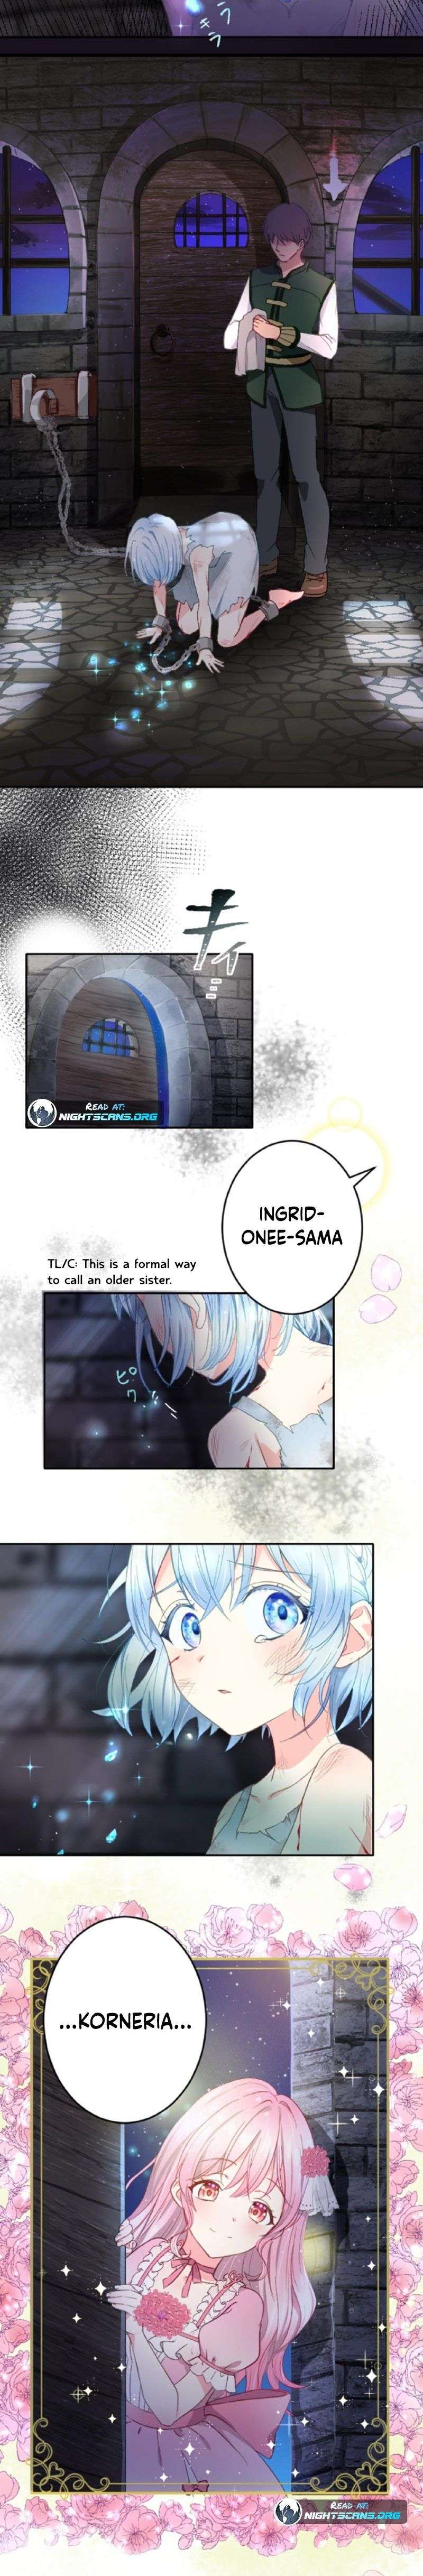 The Precious Girl Does Not Shed Tears - chapter 1 - #5